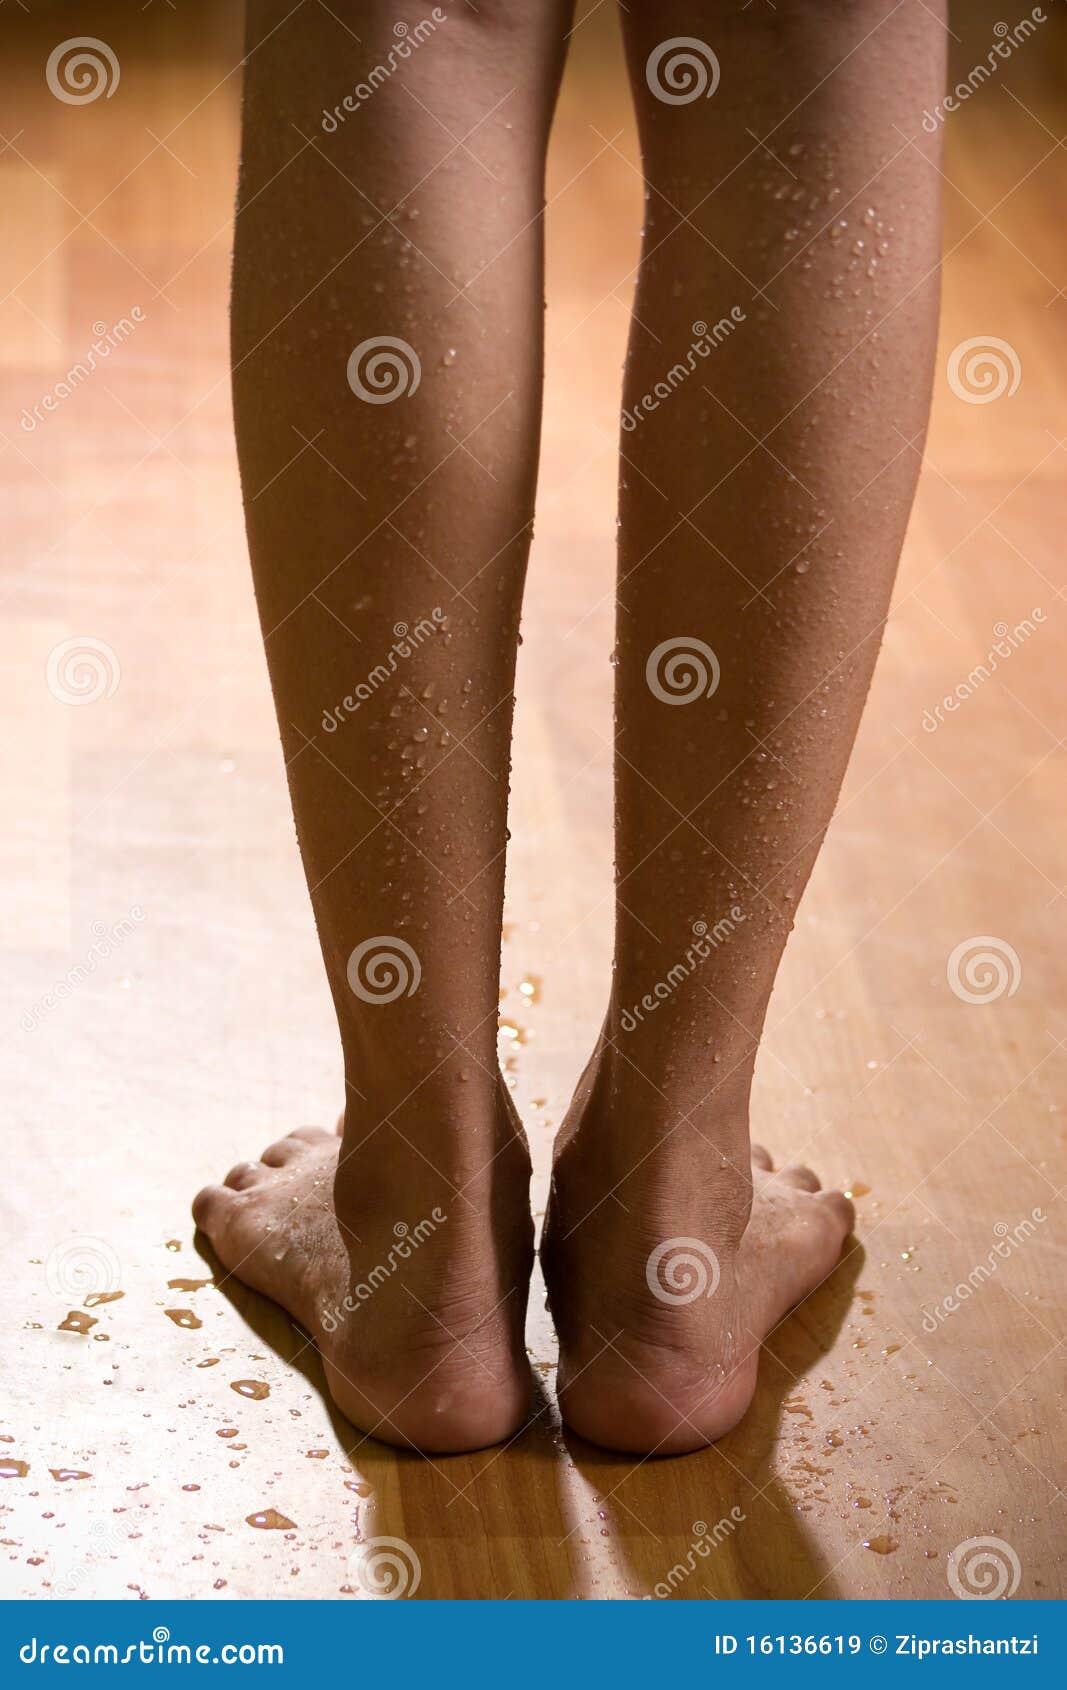 Beautiful And Wet Female Legs On Wooden Floor Royalty Free ...